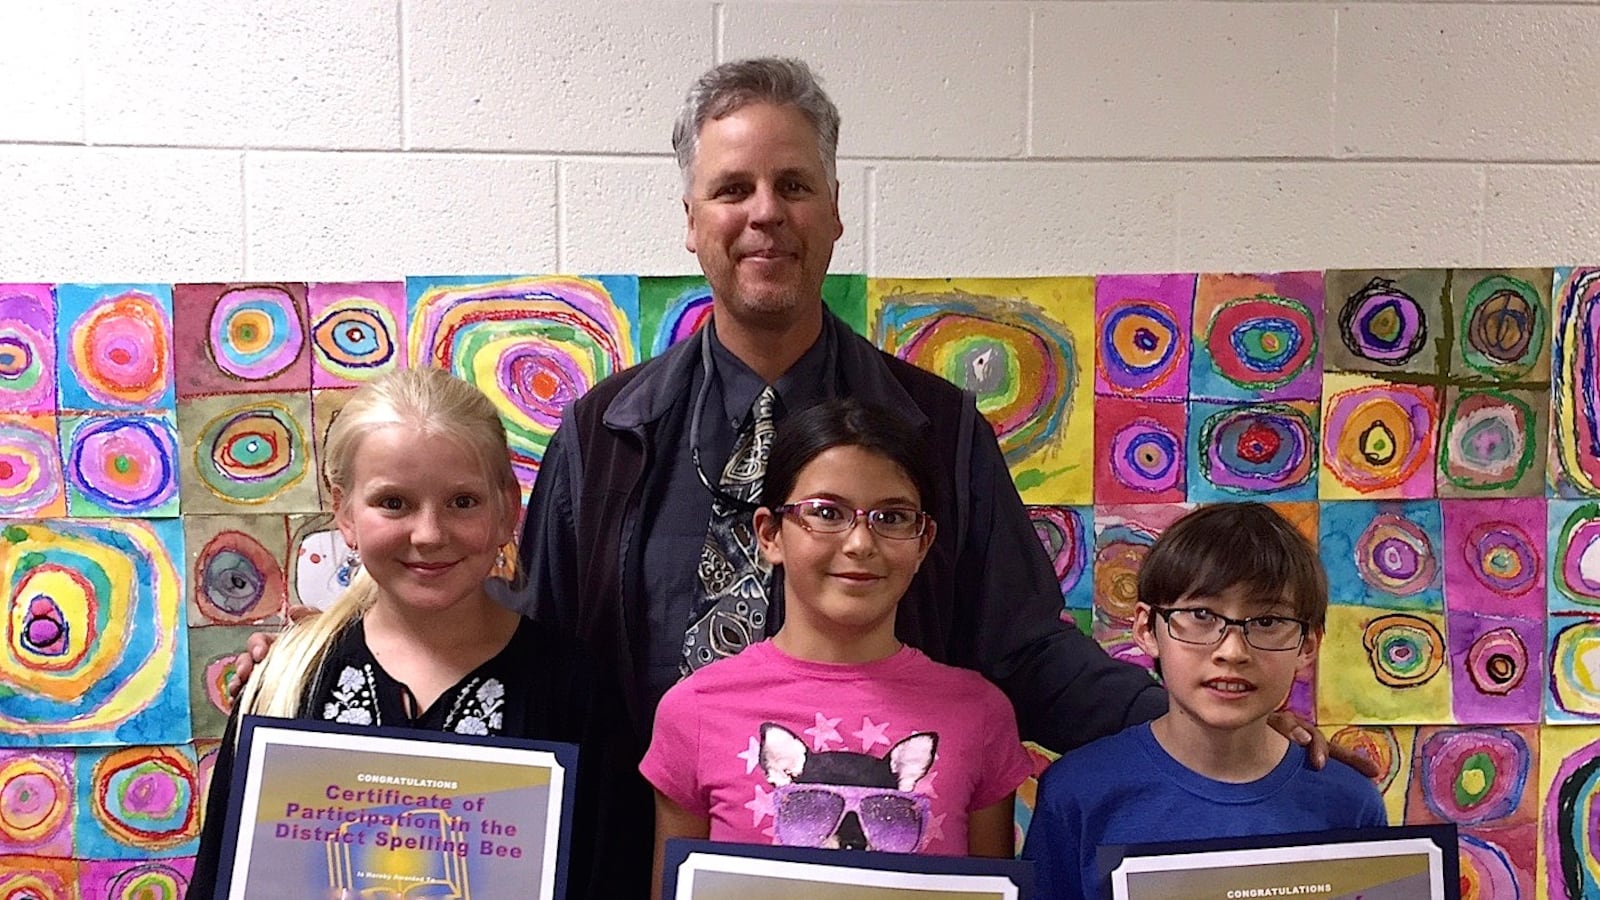 James Chamberlin, principal of Fraser Valley Elementary School in the East Grand school district, with students.